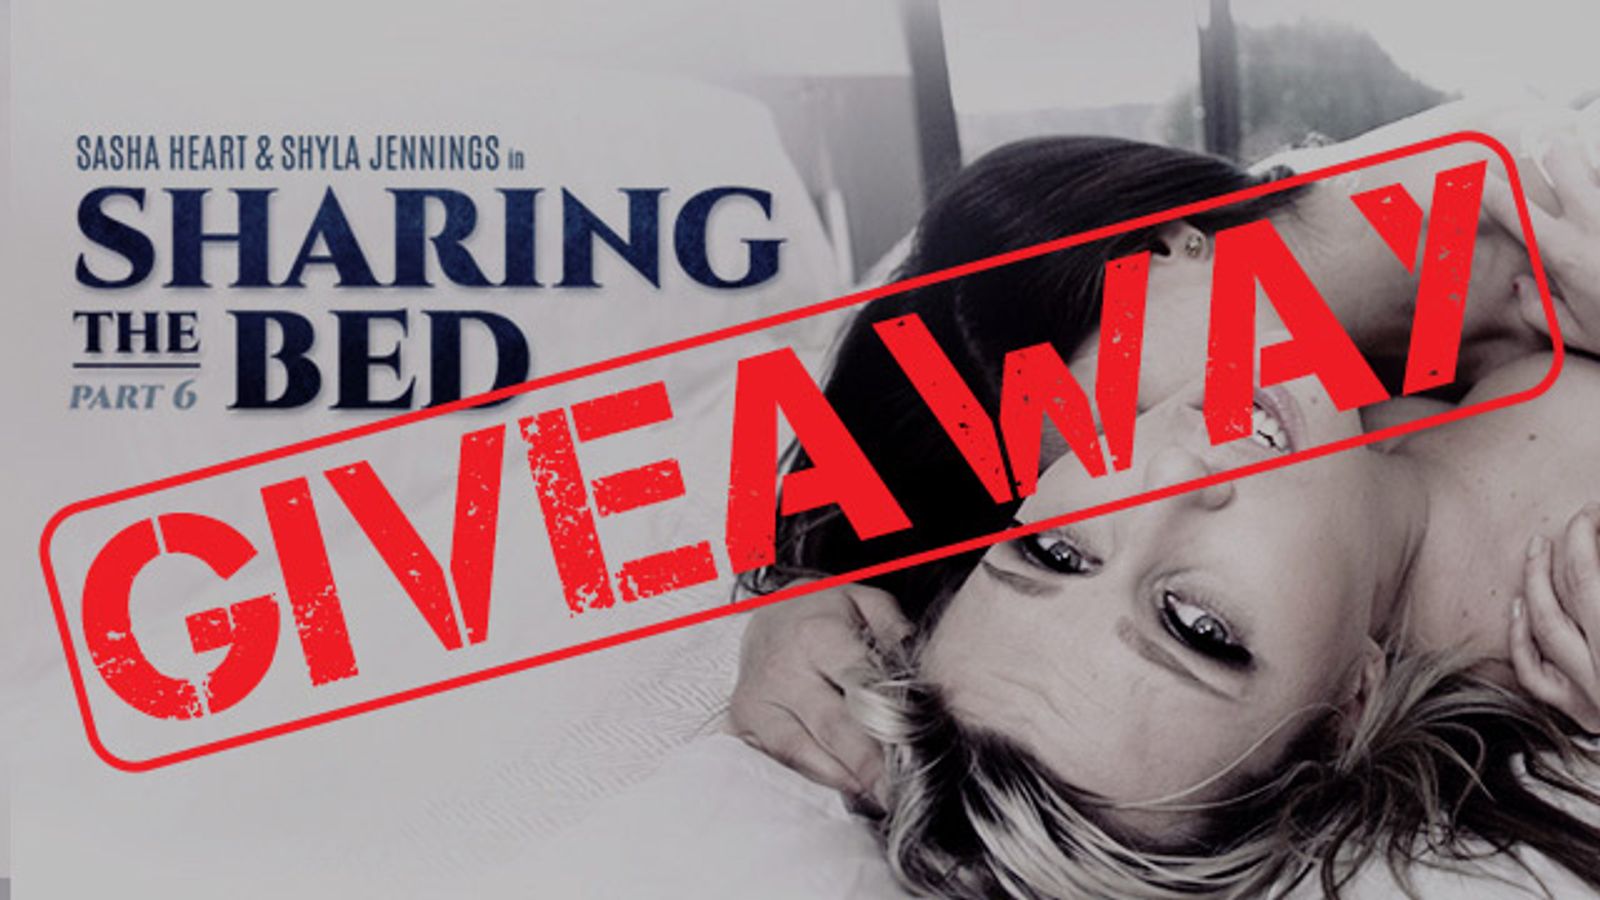 Girlsway Announces 'Sharing The Bed' Contest